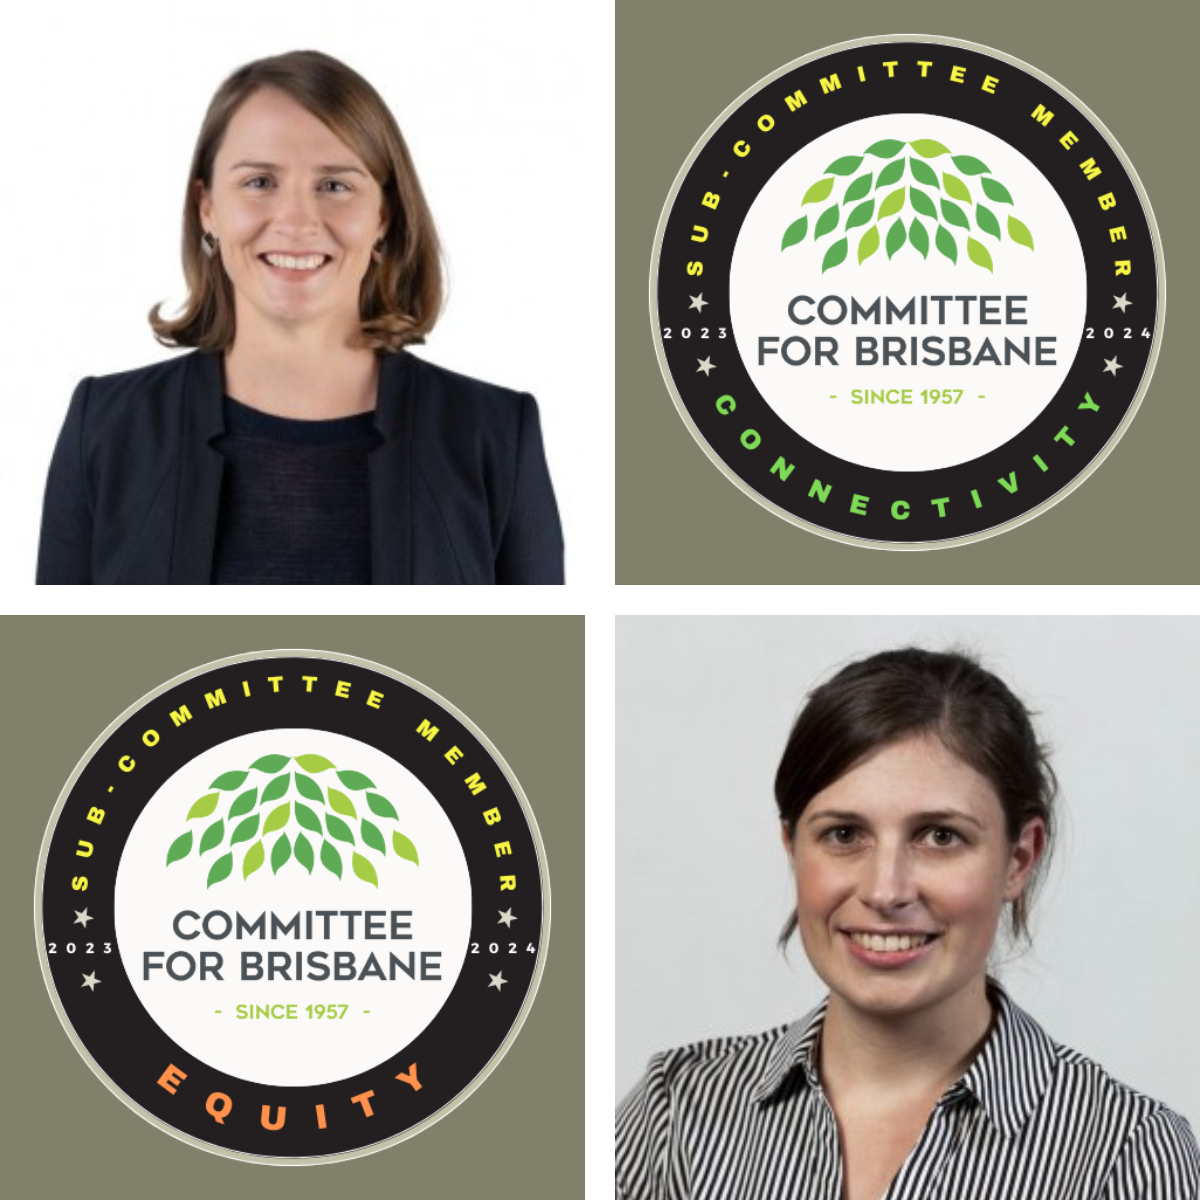 Coral Gillett in a black jacket and shirt in the top left hand corner, in the bottom right is Kelly in a black & white striped business shirt. In the other two opposite corners are the Equity and Connectivity logos for the Committee of Brisbane containing green leaves on a white circle, encapsulated by a black circle. 